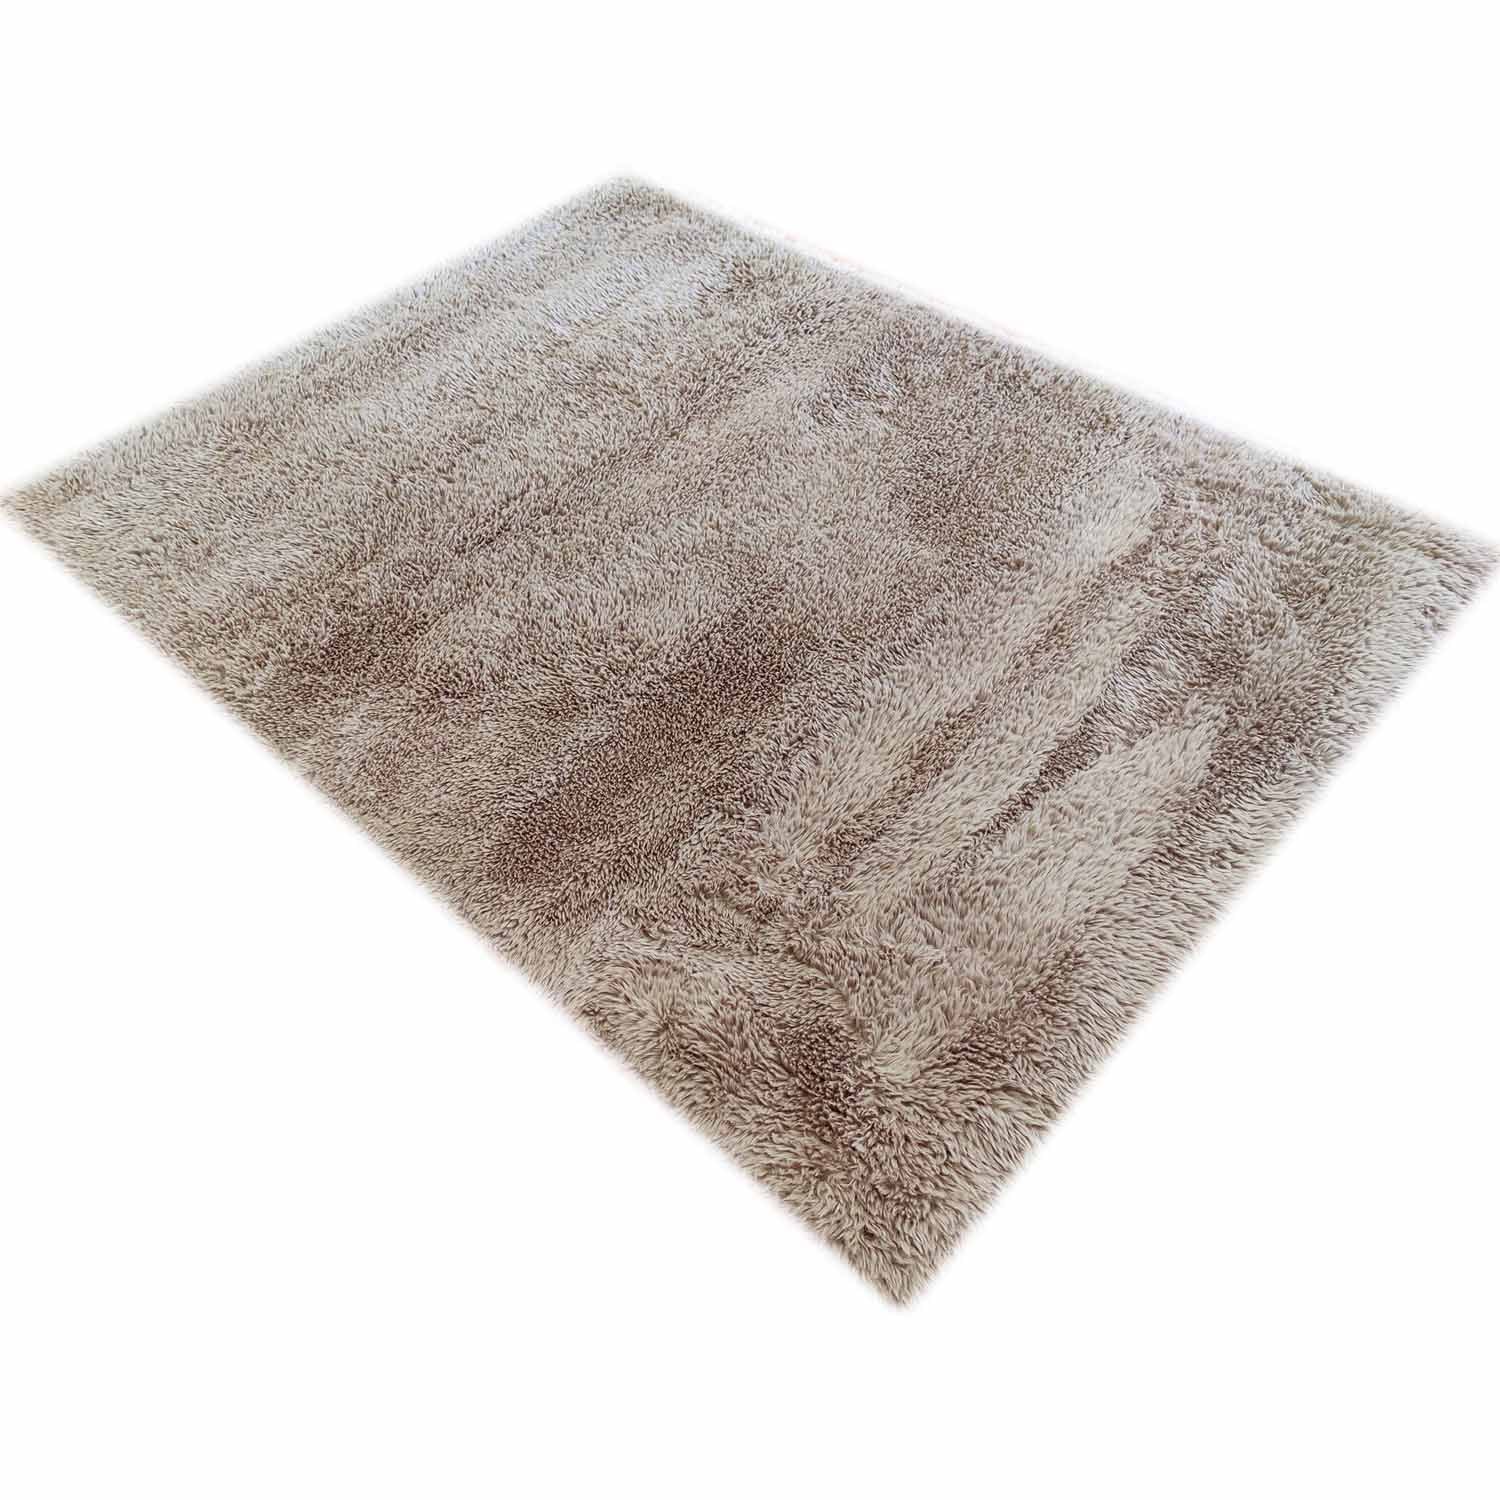 The Home Living Room Sheepskin Rug 120cm x 160cm - Taupe 1 Shaws Department Stores